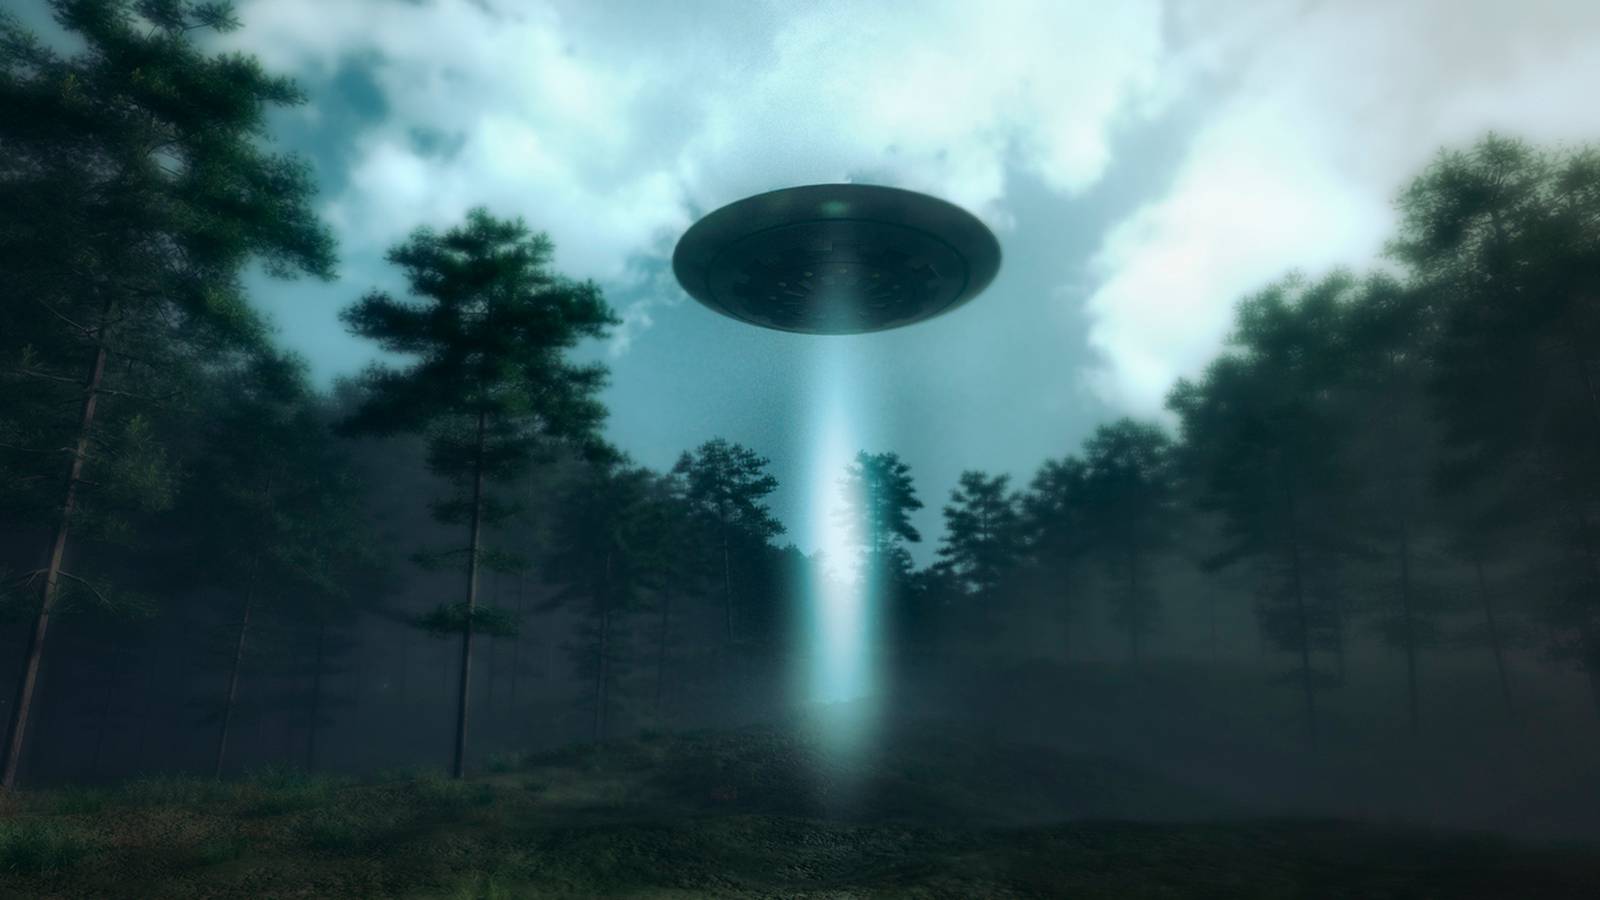 Massachusetts among states with most reported UFO sightings Boston 25